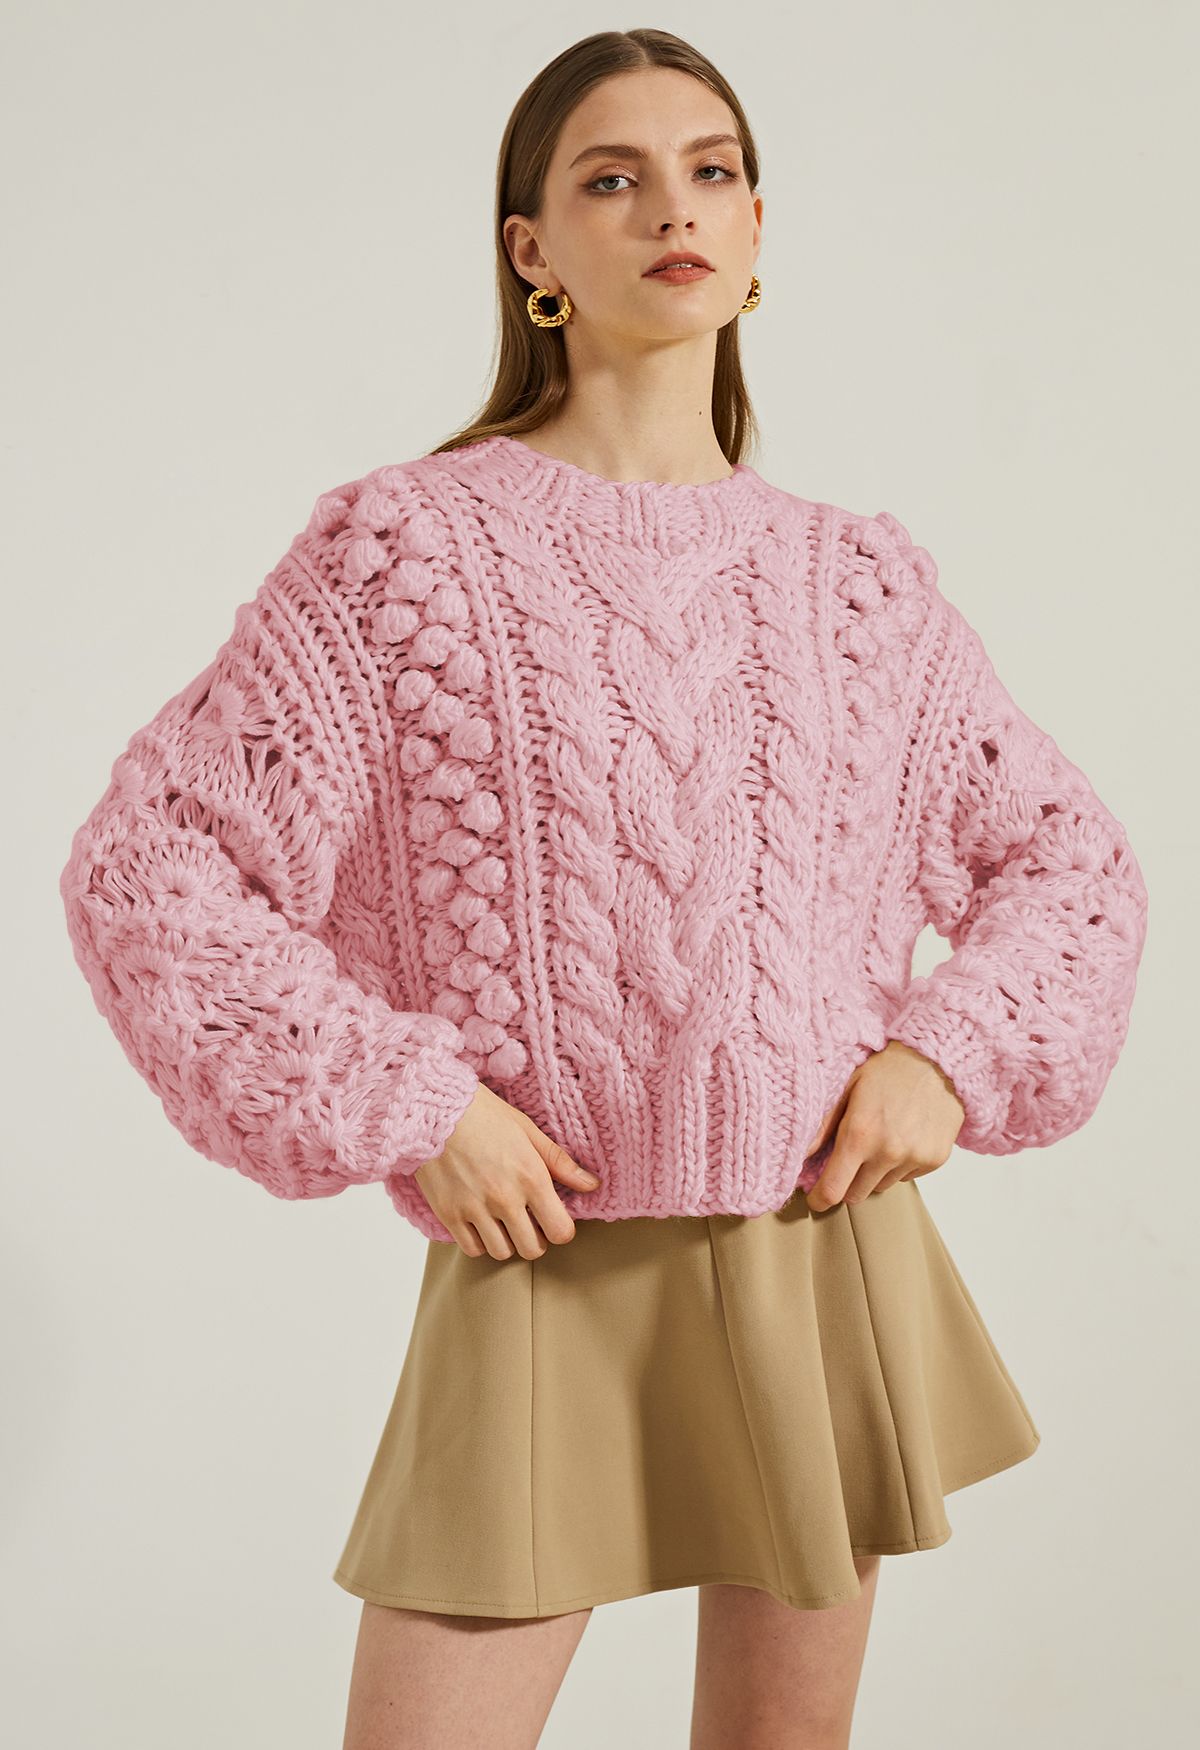 Crew Neck Pointelle Pom-Pom Knit Sweater in - Retro, Indie and